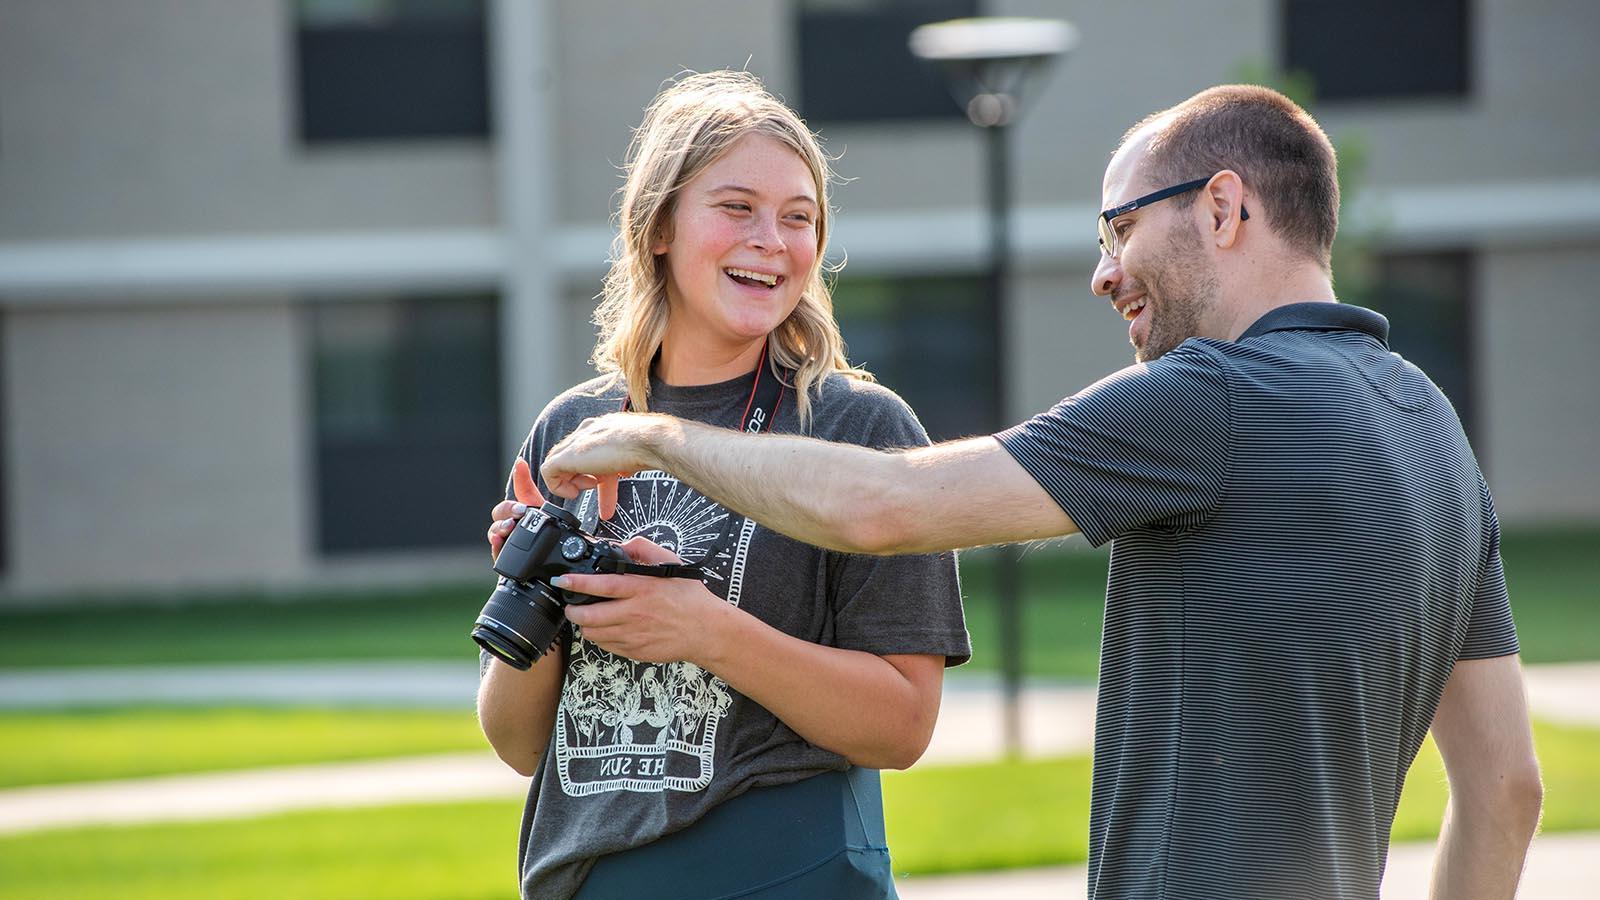 Photography professor smiling and pointing to controls on year-round campus student’s camera